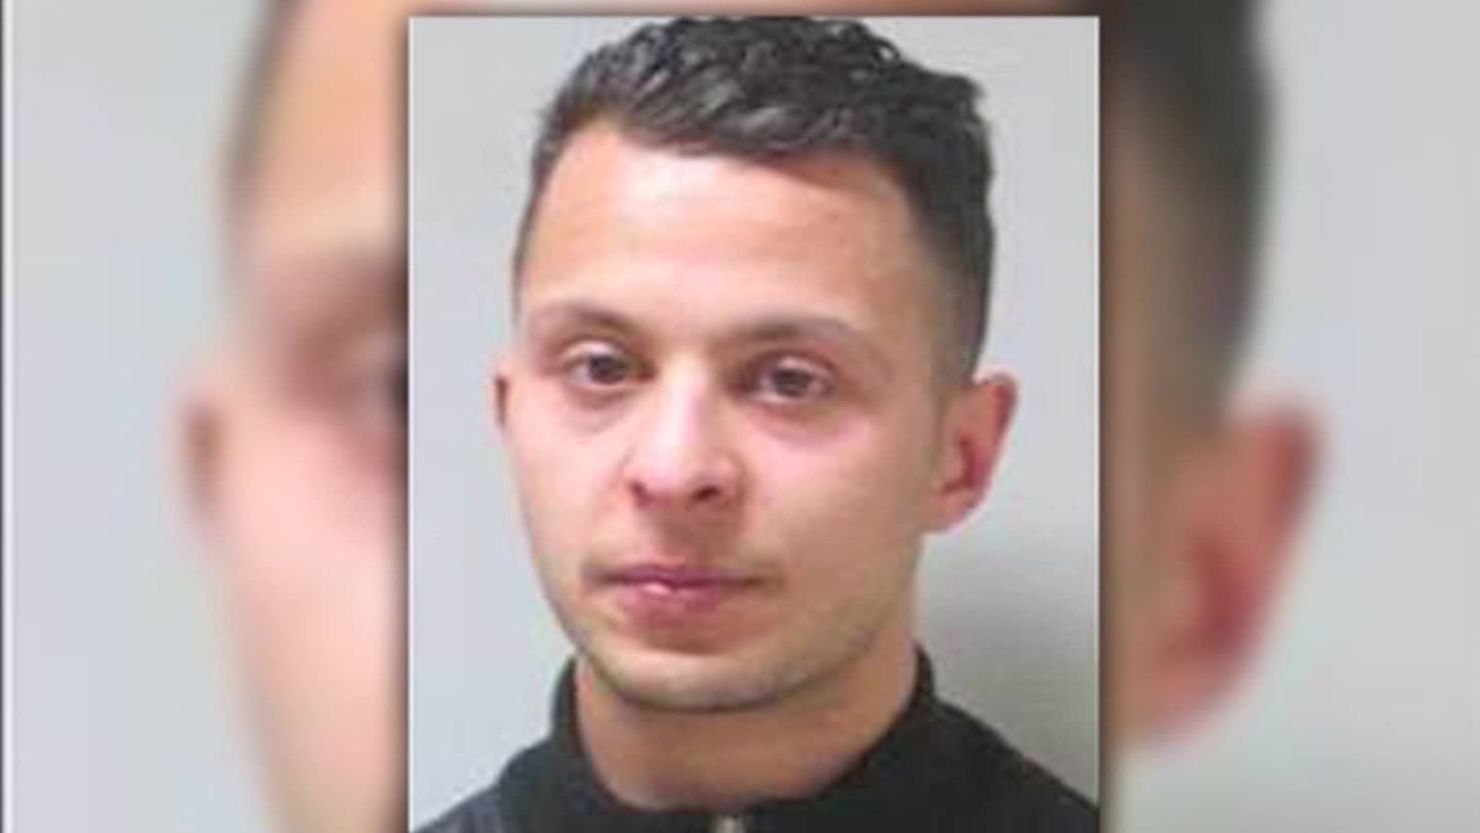 Salah Abdeslam is suspected of being involved in the Paris terror attacks in November.